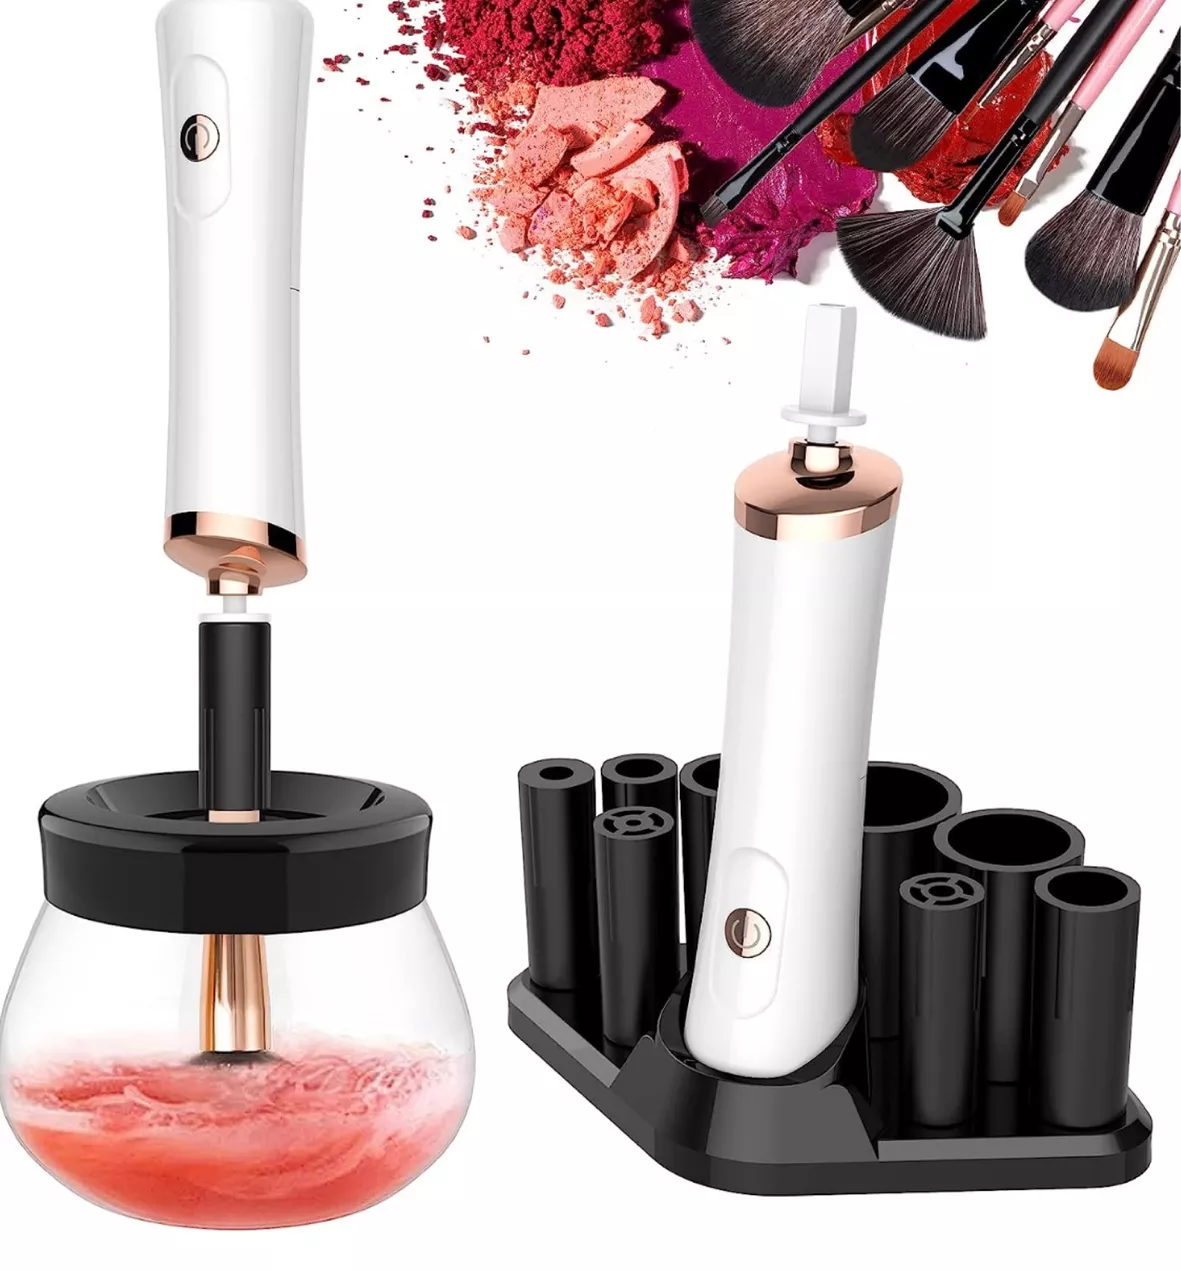 Fesmey Makeup Brush Automatic Cleaner Machine,Super-Fast Electric